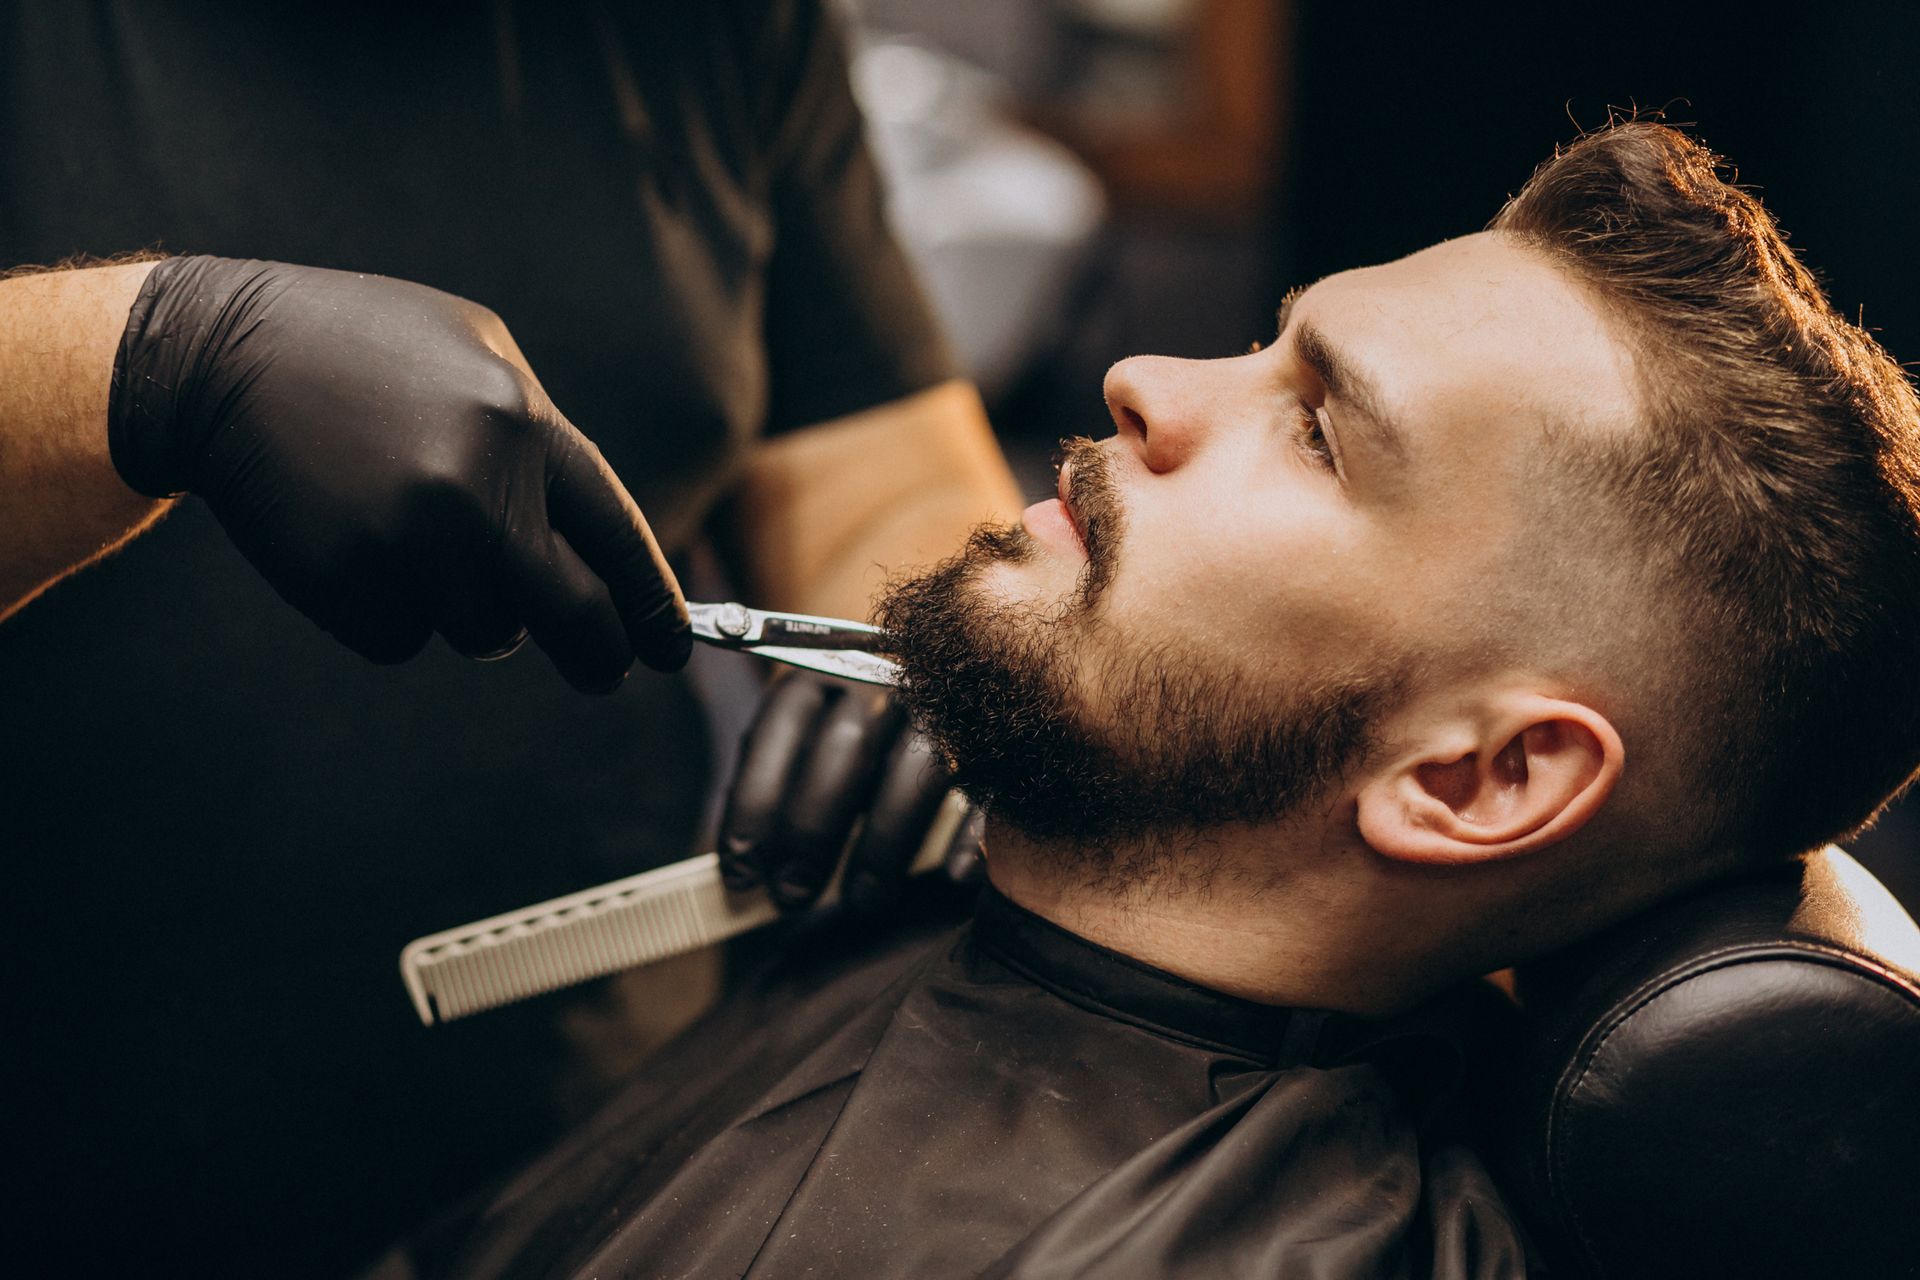 A man is getting his beard shaved by a barber in a barber shop.